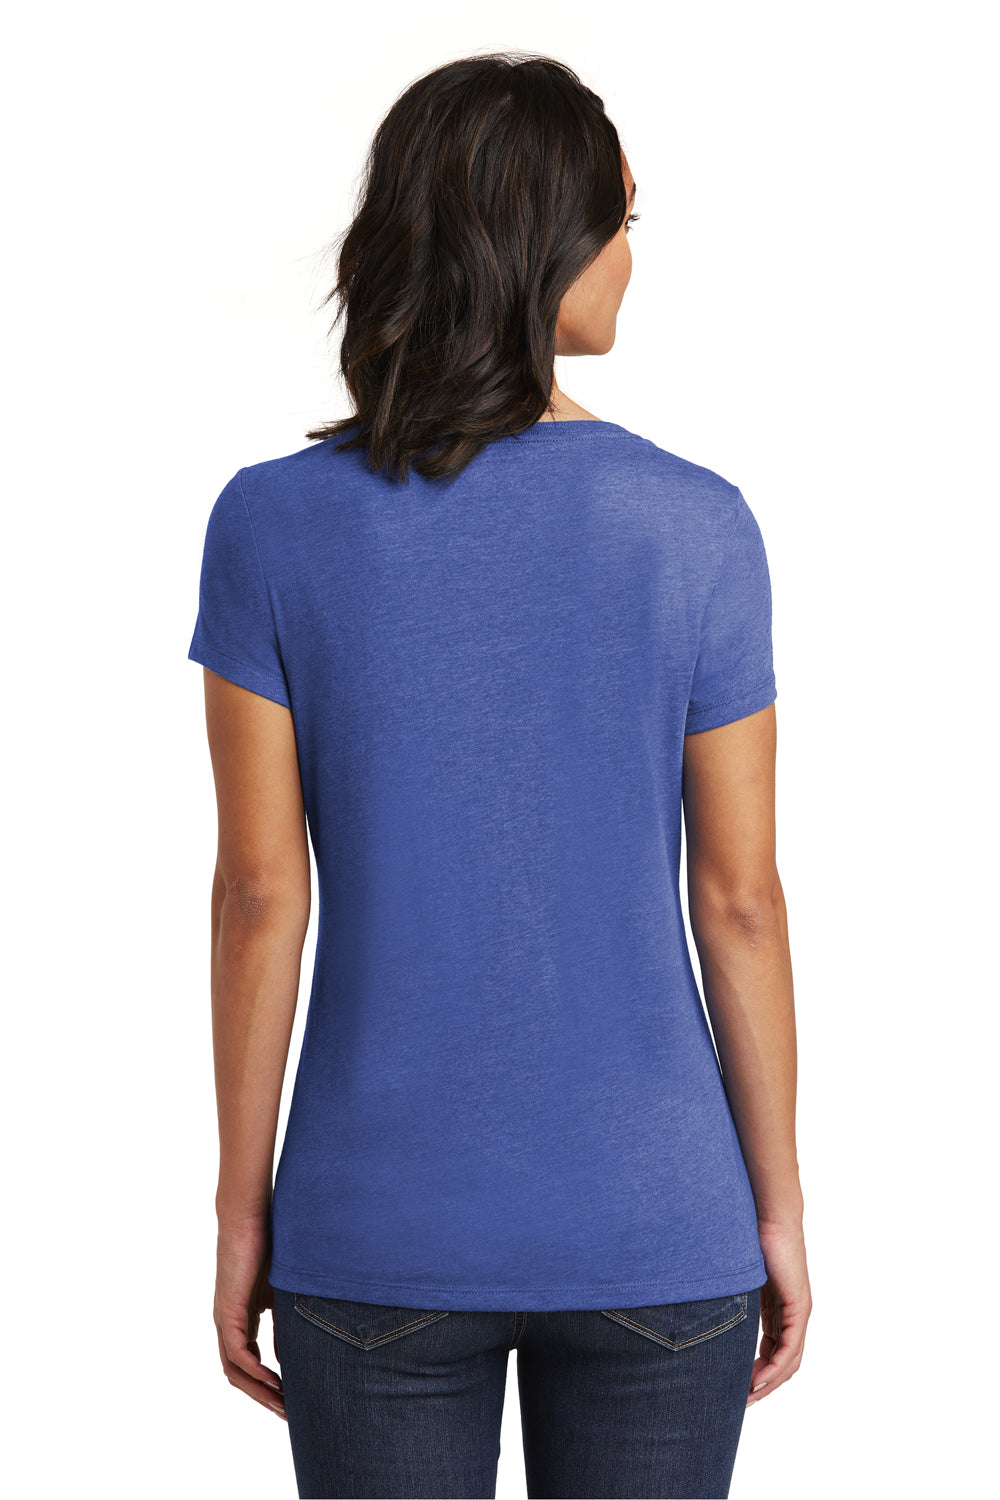 District DT6503 Womens Very Important Short Sleeve V-Neck T-Shirt Heather Royal Blue Back